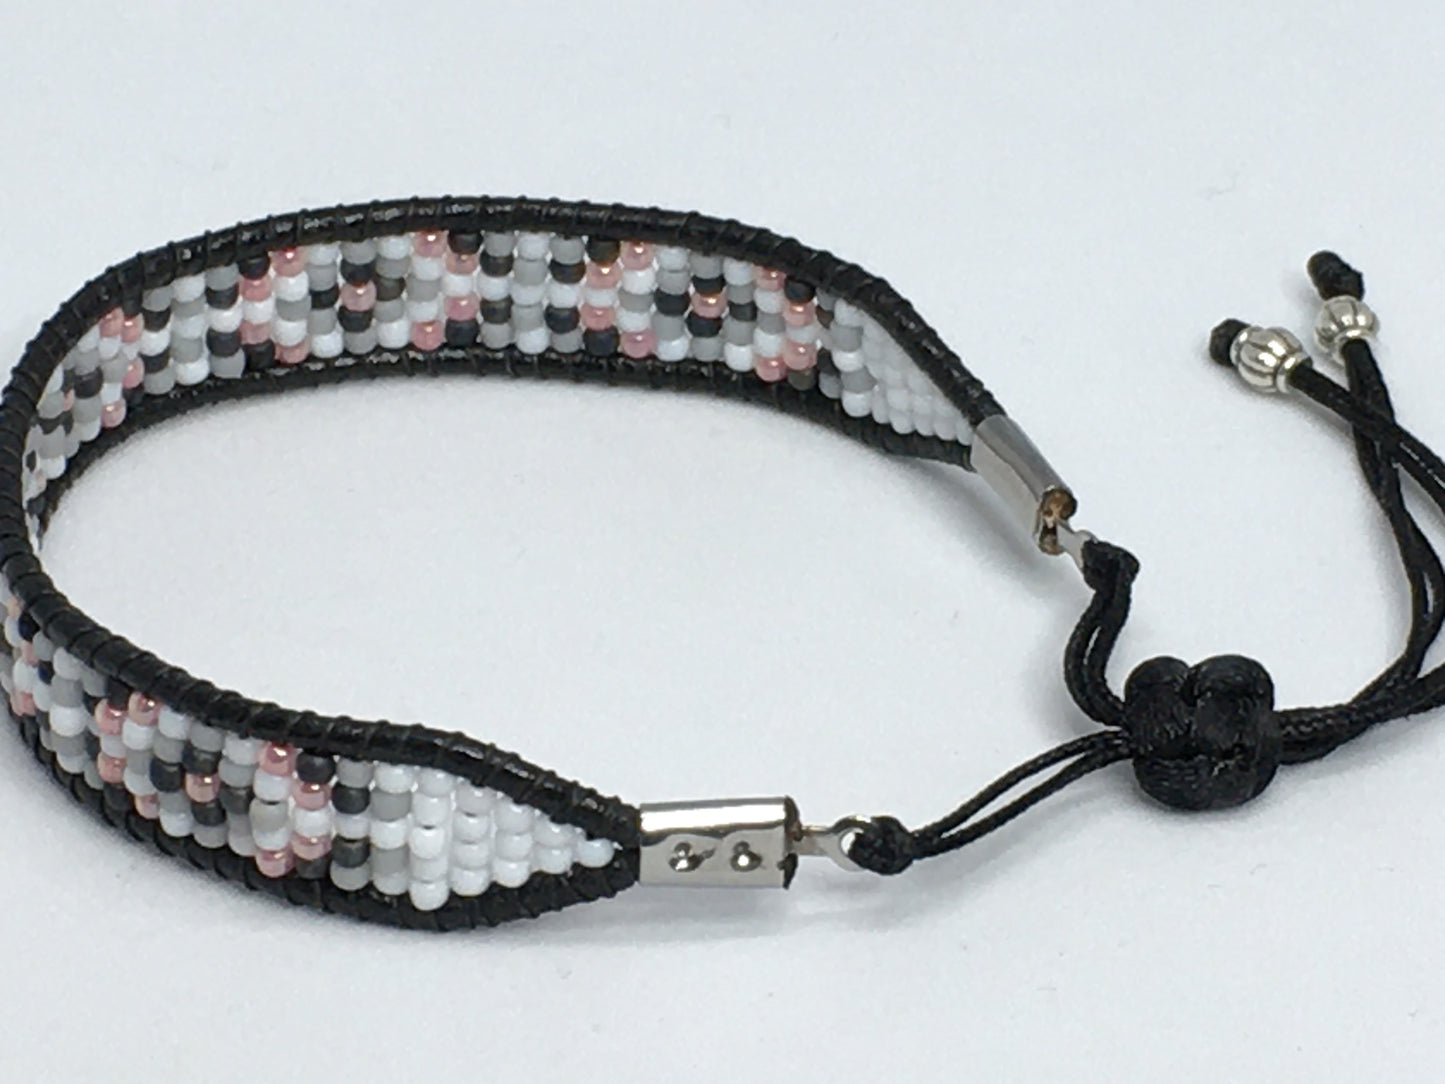 6.25" Bead and Leather Women's Bracelet